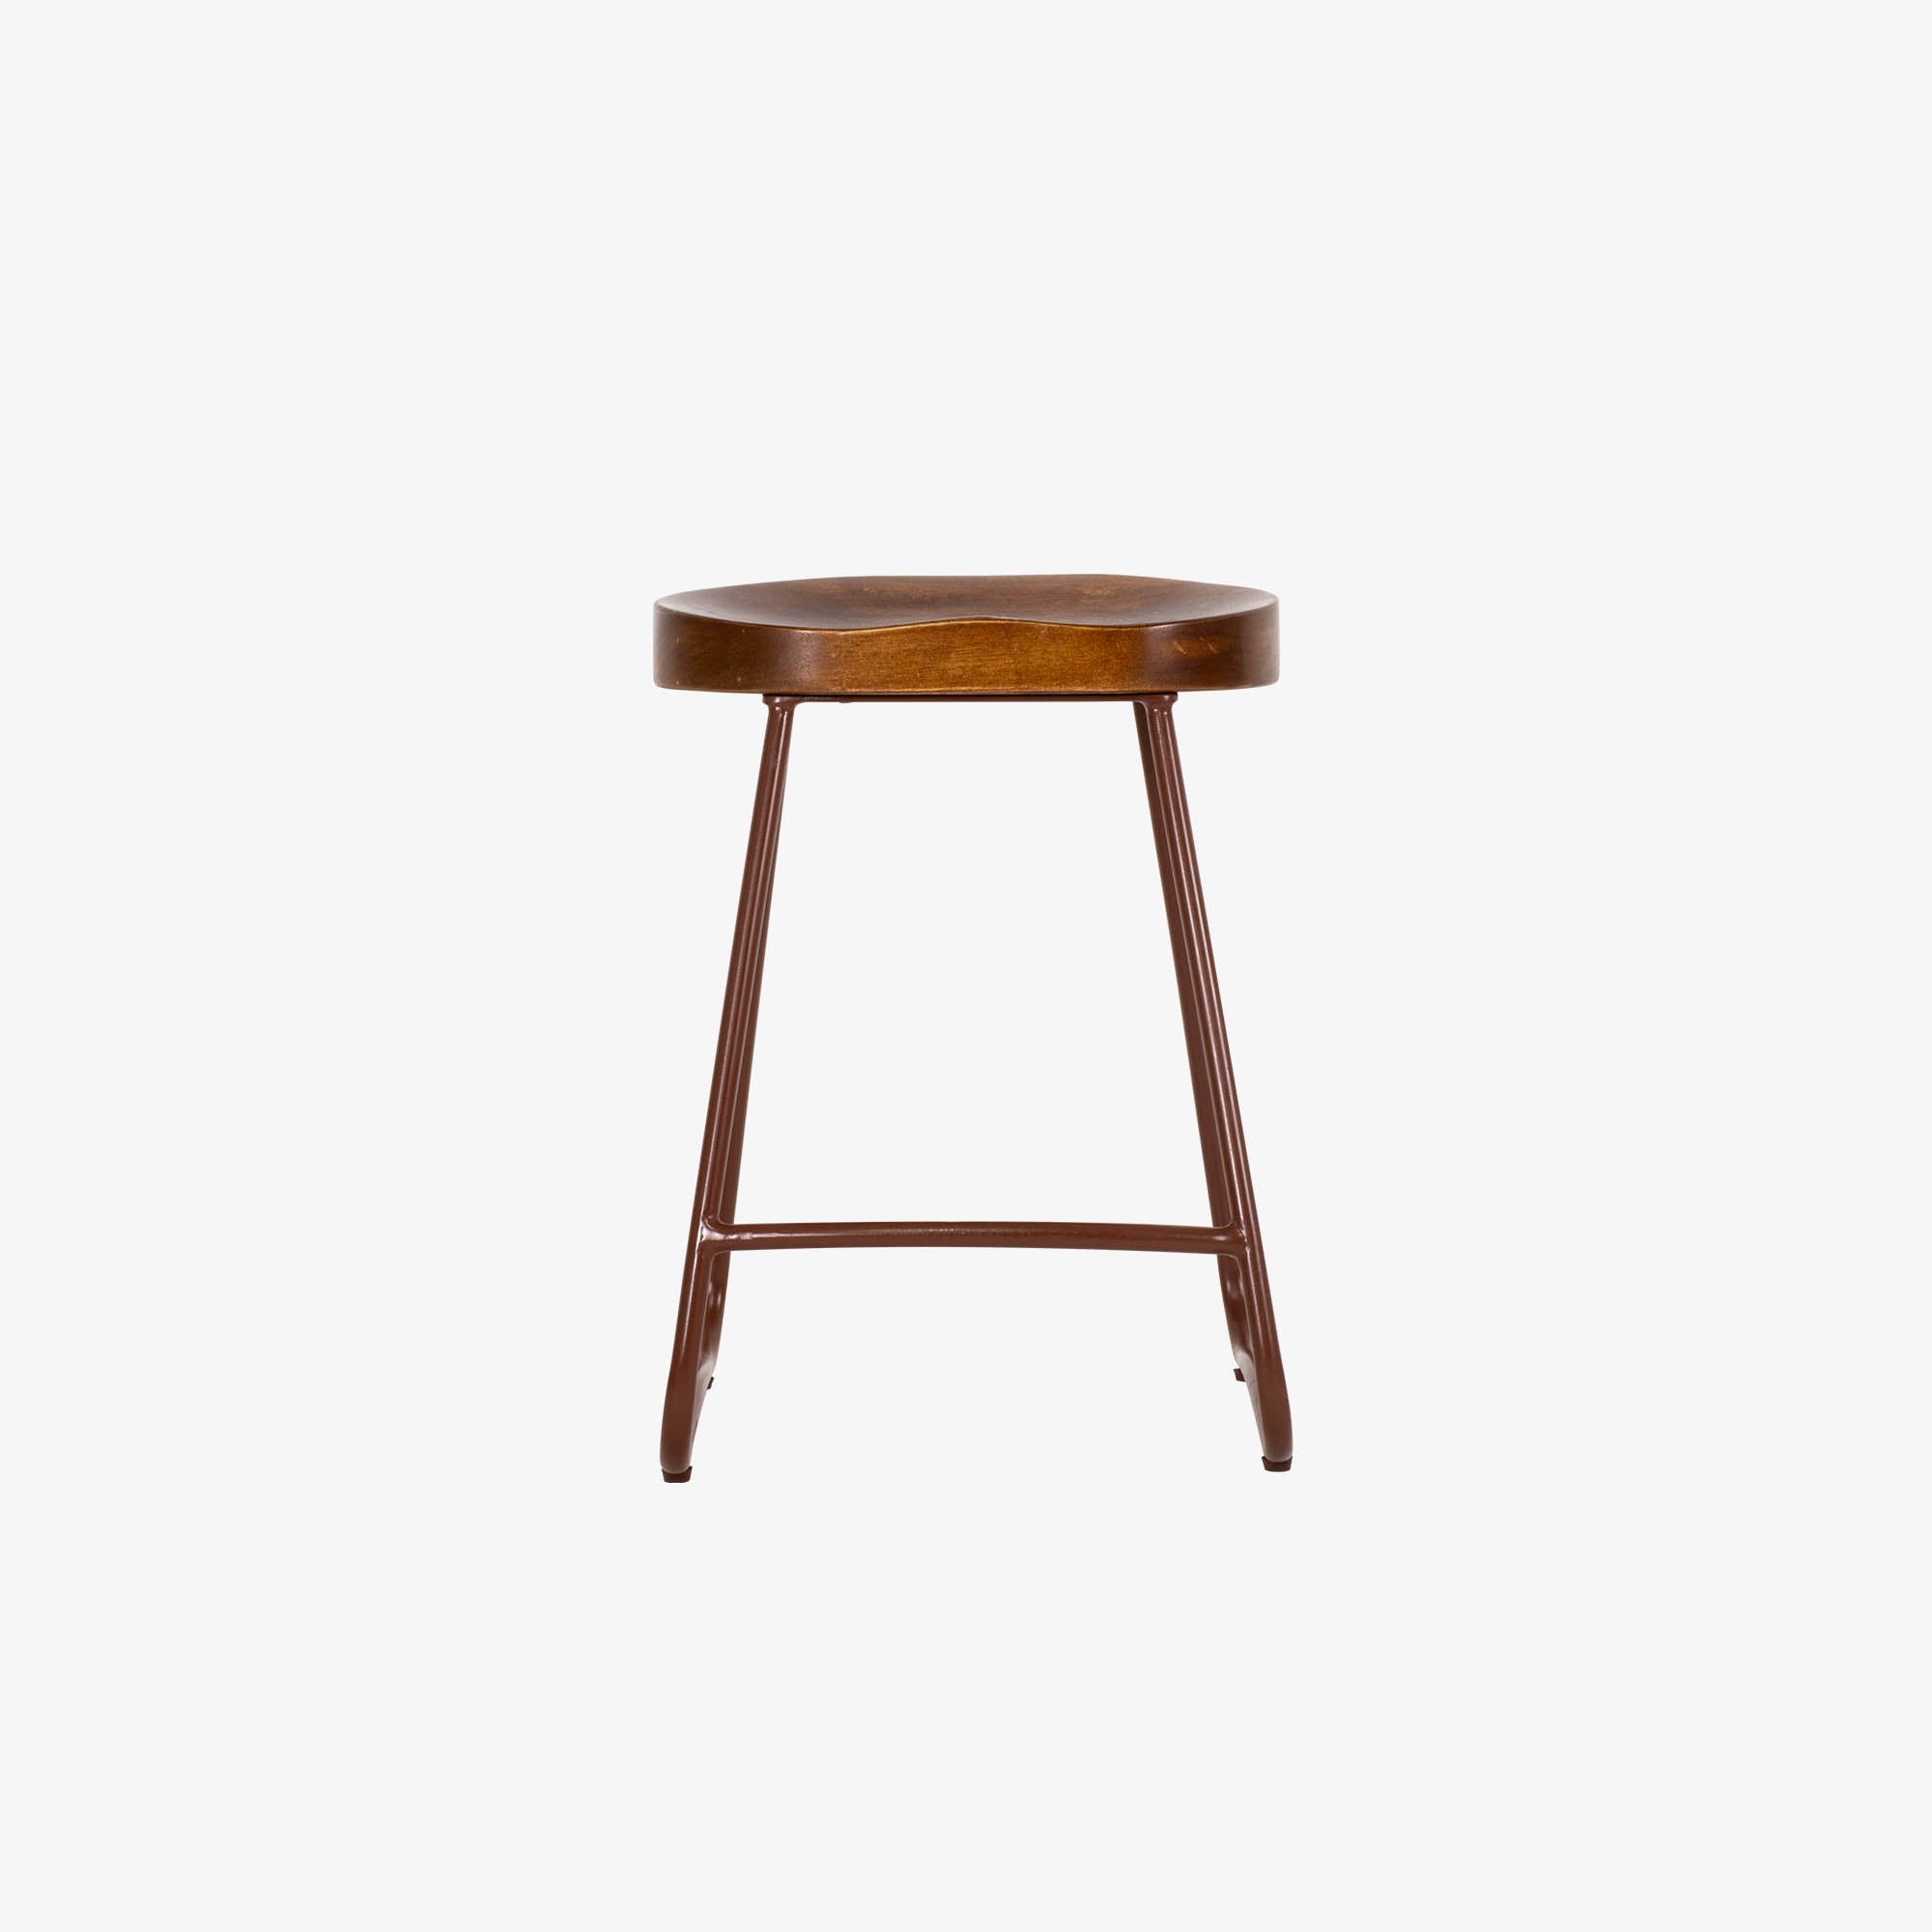 Stool finly – terra